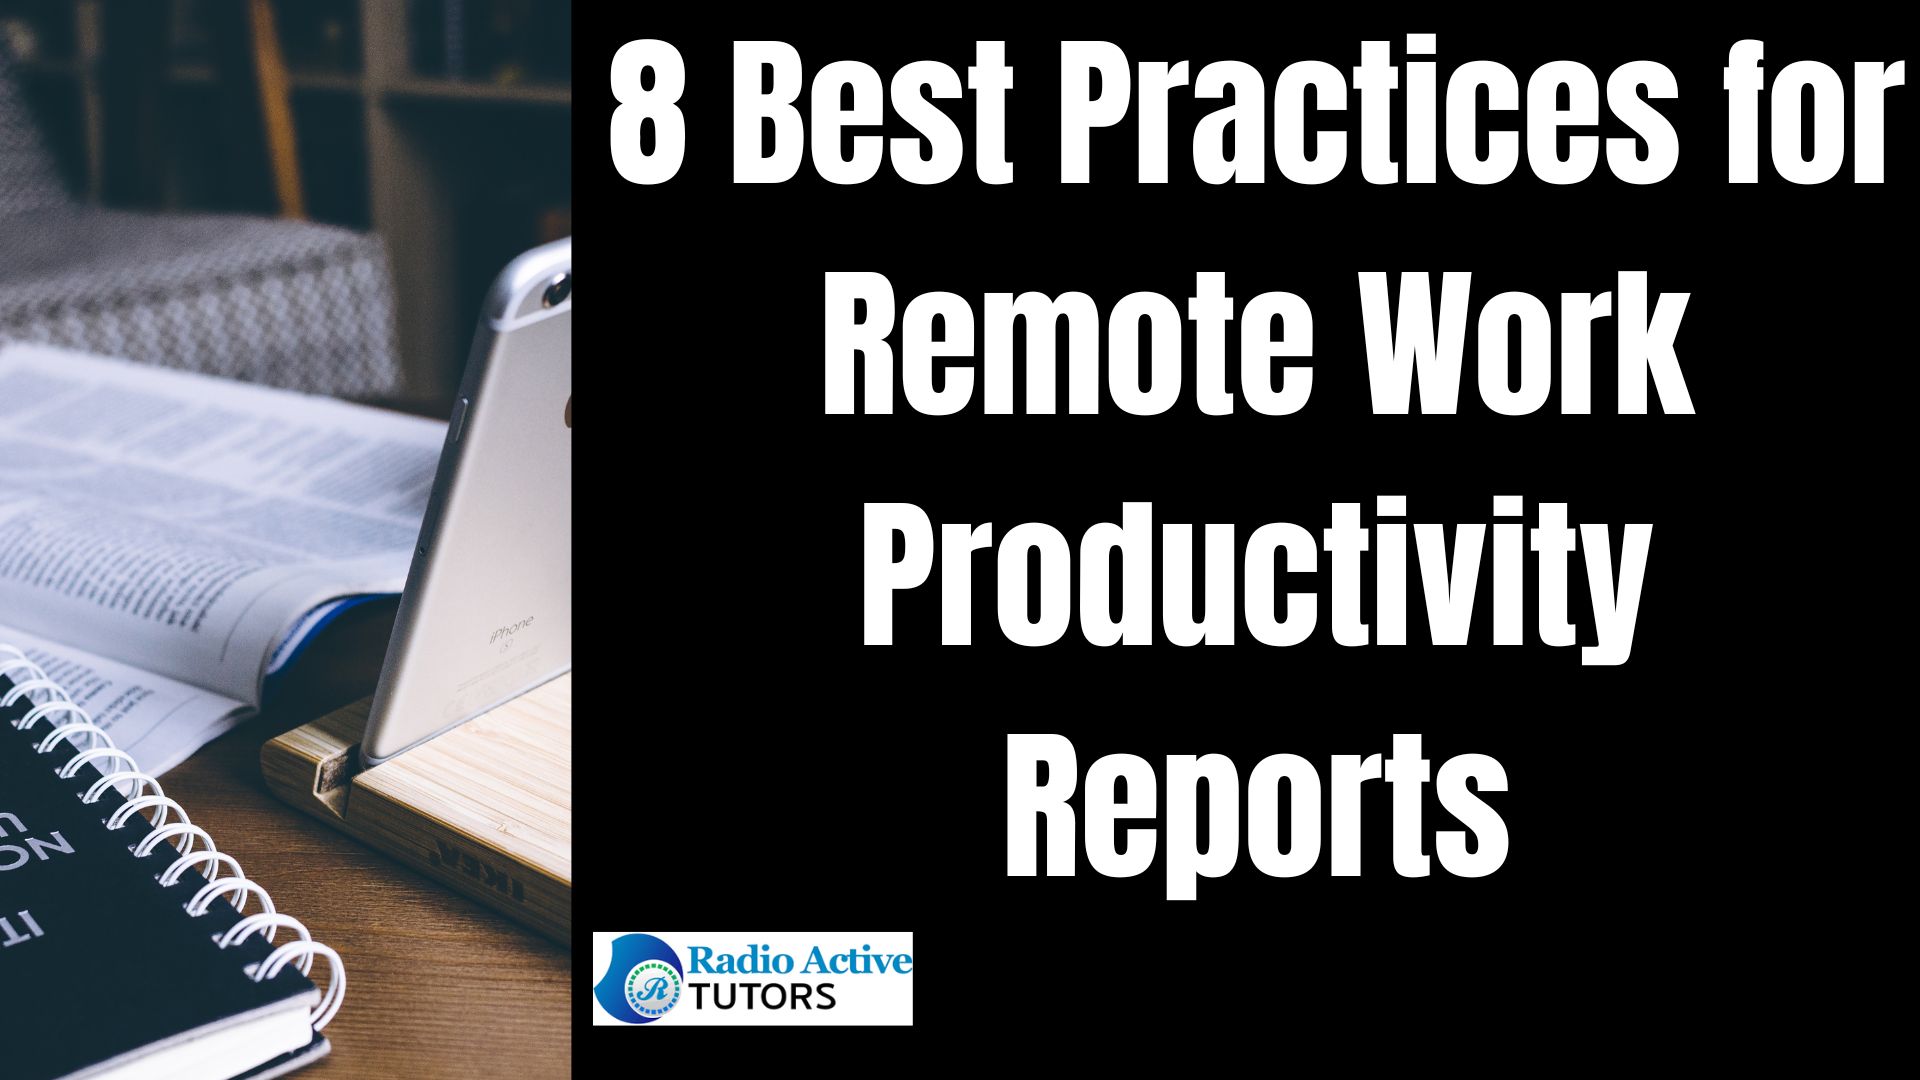 8 Best Practices for Remote Work Productivity Reports